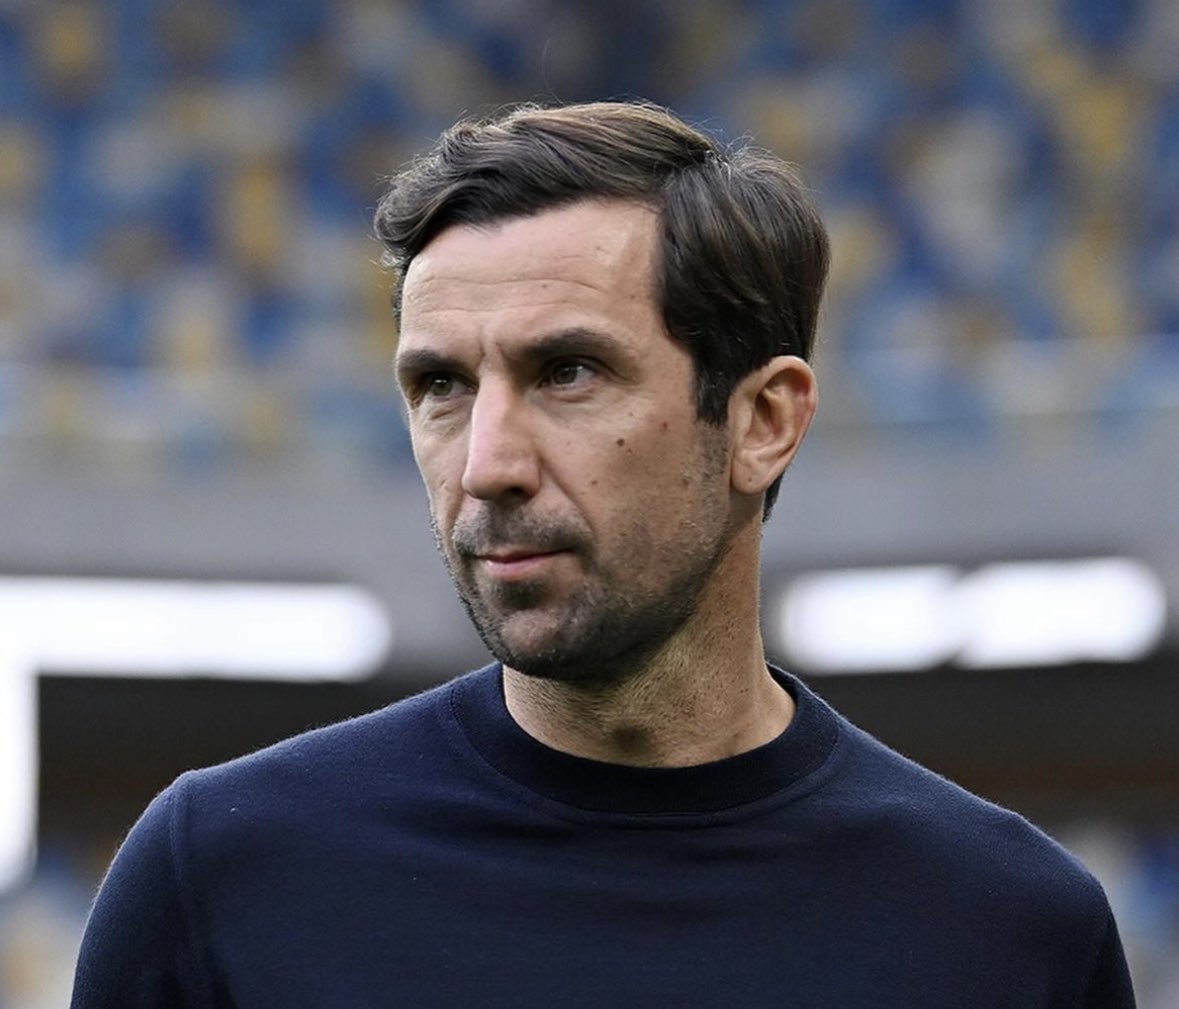 🟠🇺🇦 Shakhtar Donetsk are working to appoint new manager after club director Darijo Srna won 1st game as caretaker coach.

Decision on new head coach will be made in the next 24/48h.